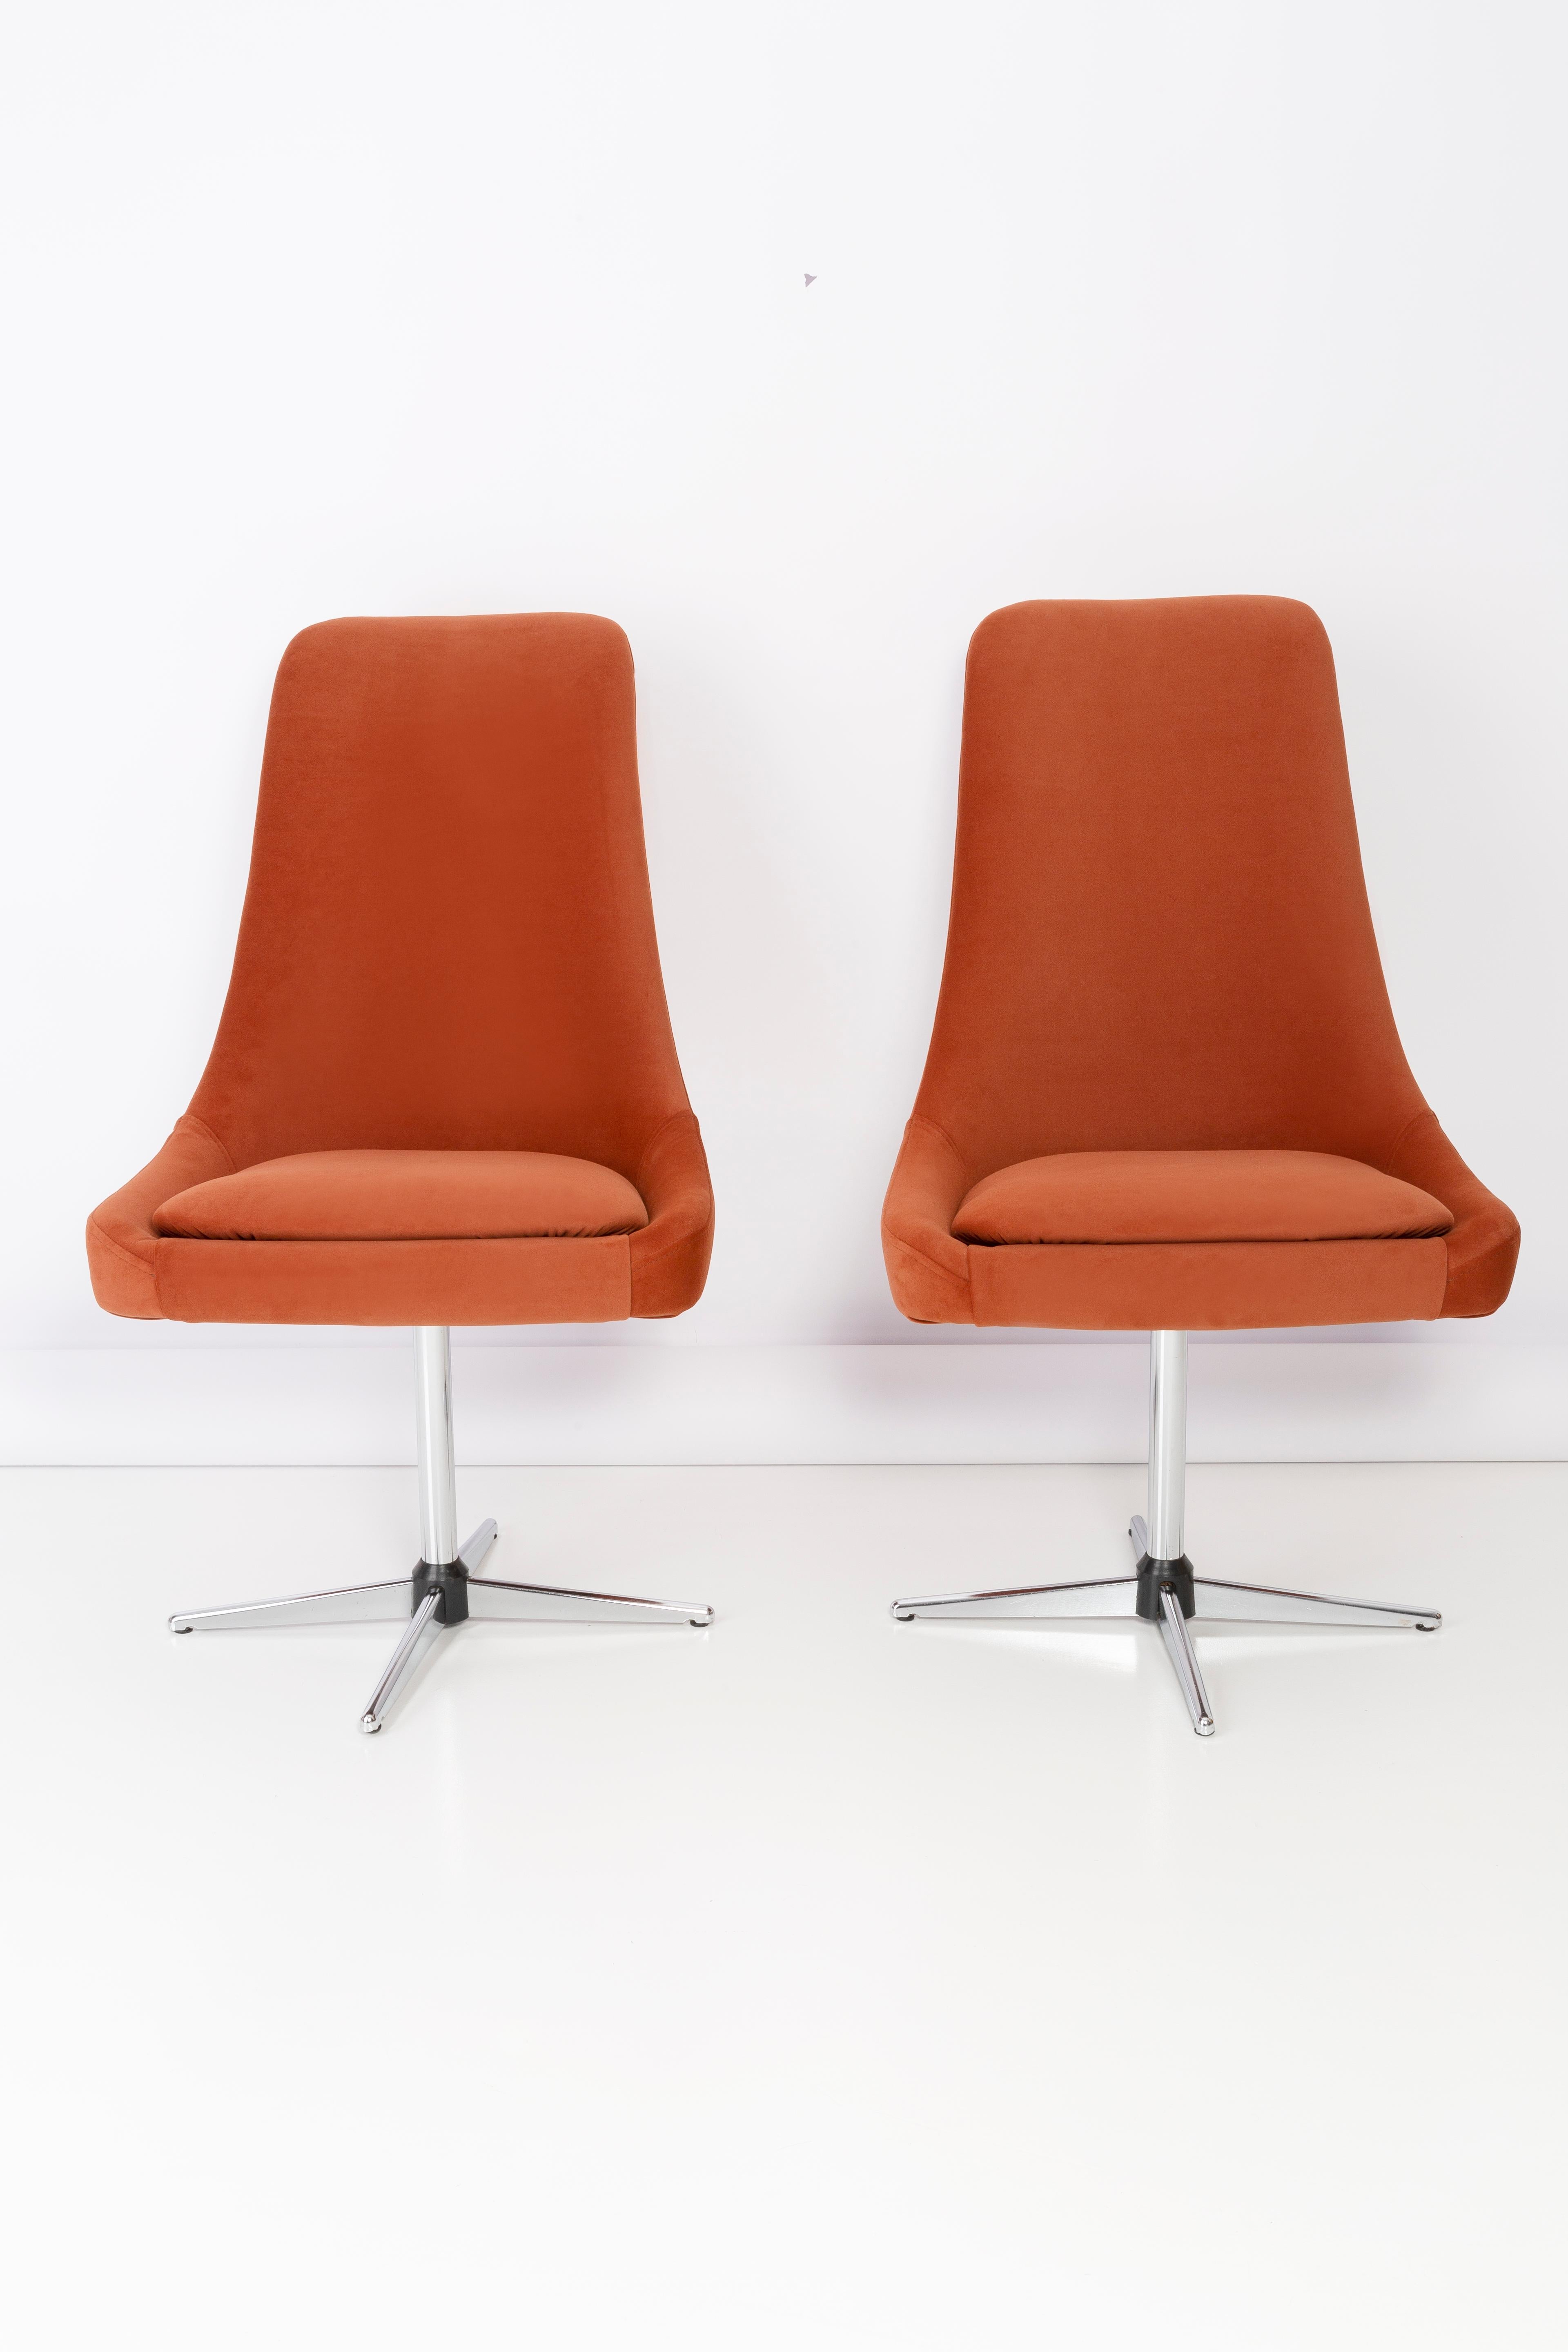 Pair of swivel armchairs from the 1960s, produced in the Silesian furniture factory in Swiebodzin - at the moment they are unique. Very comfortable, perfect as a desk chairs. Due to their dimensions, they perfectly blend in even in small apartments